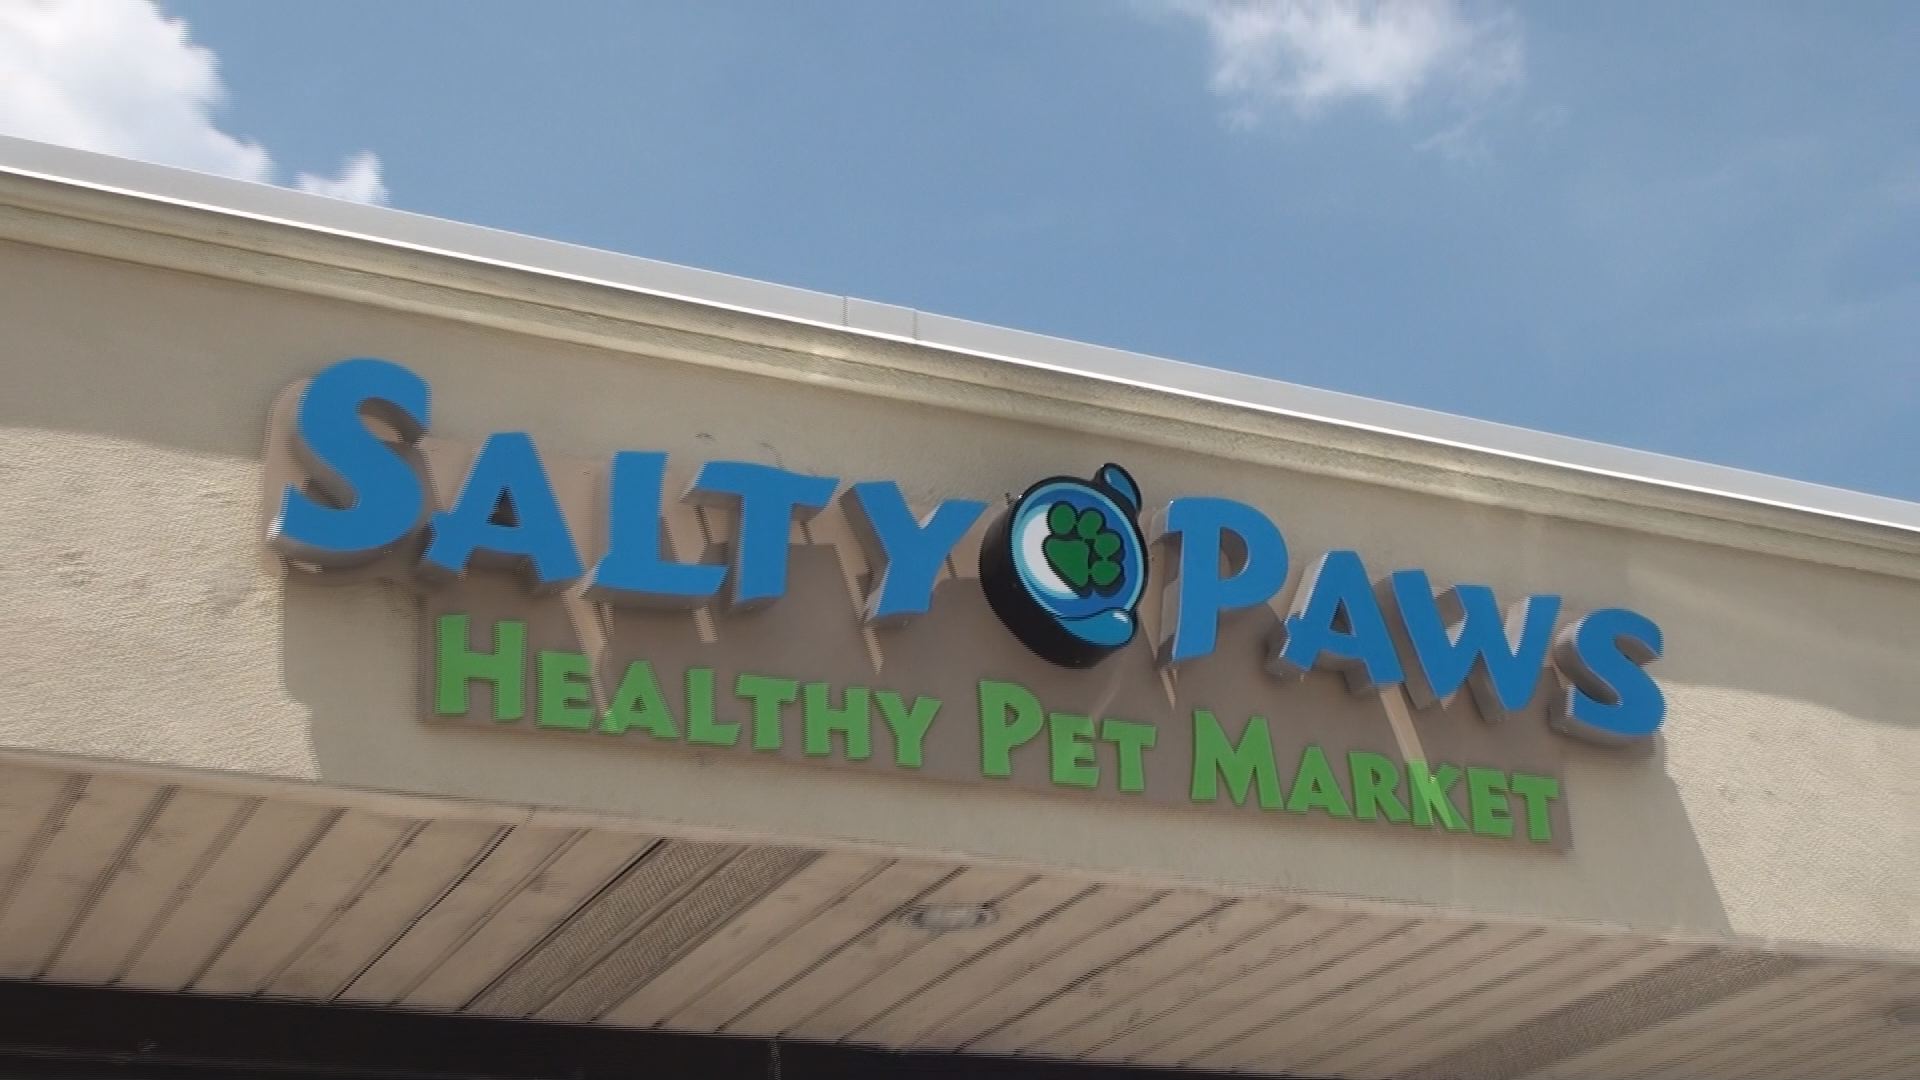 salty paws healthy pet market